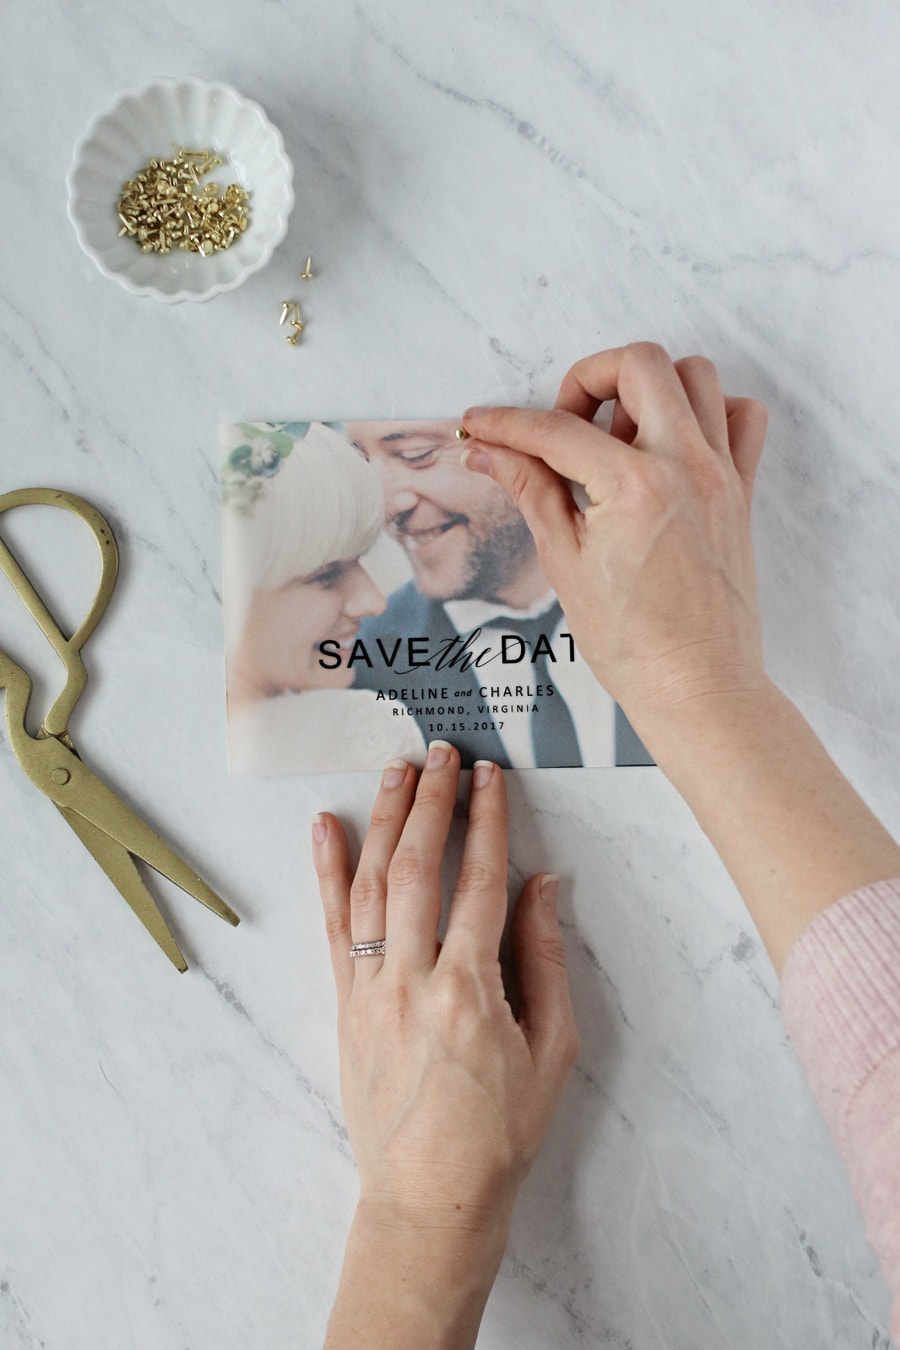 Think you can't make gorgeous (and free) save the dates at home? Use one of our free templates to make these vellum save the dates. We promise your guests will love them.